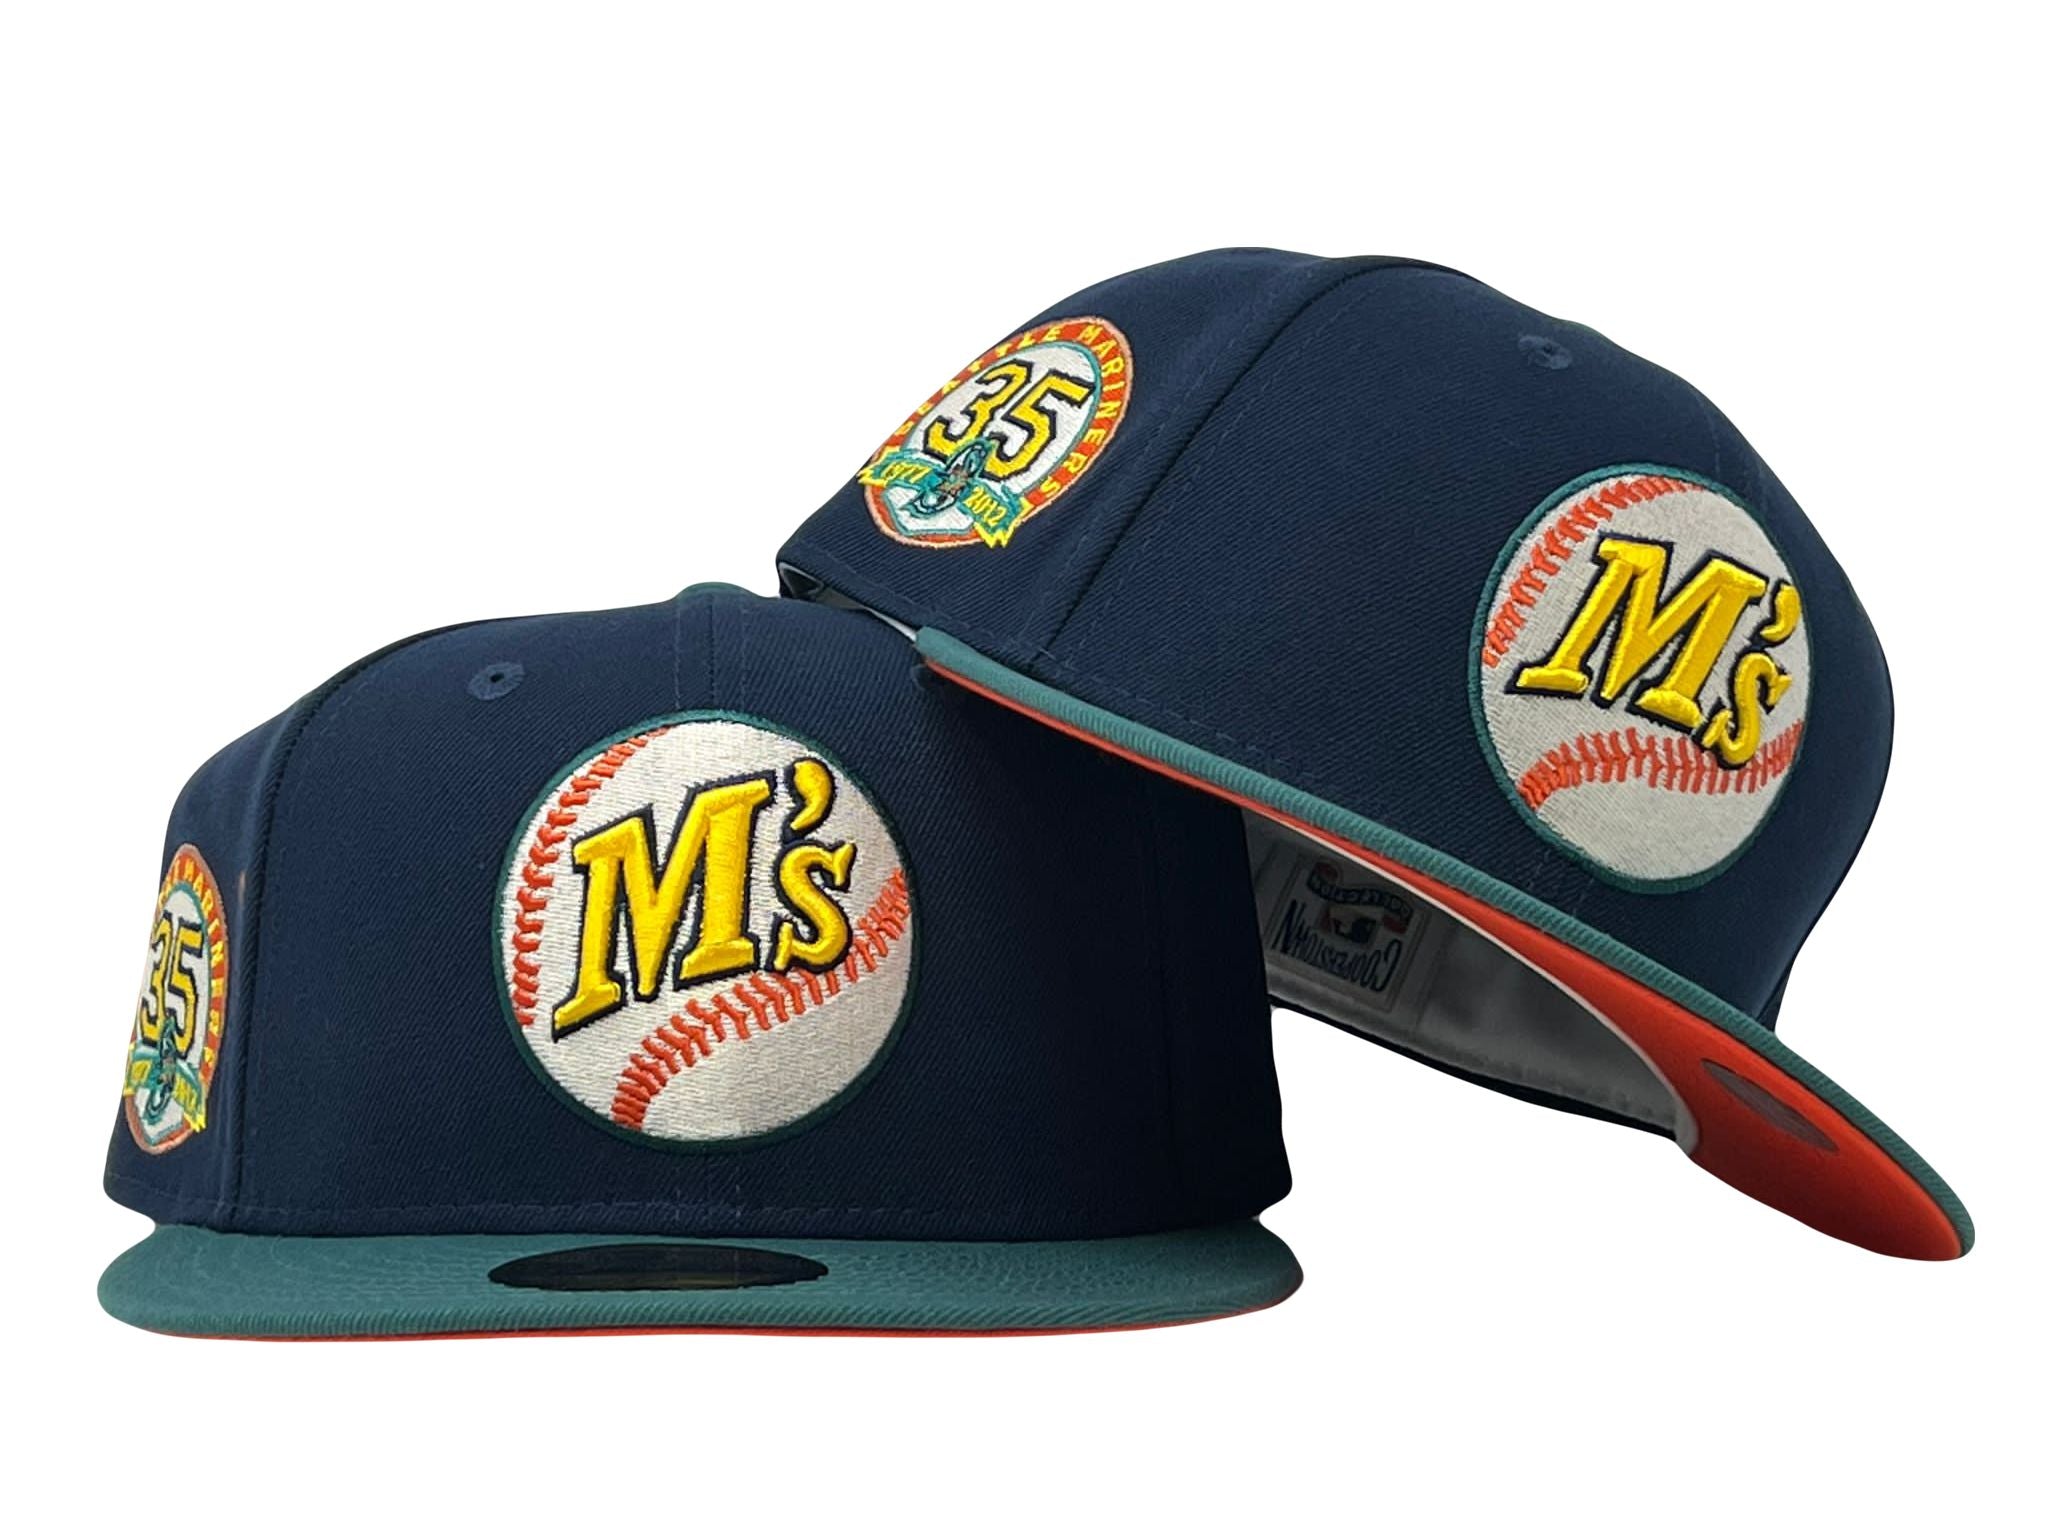 Seattle Mariners Cooperstown Mitchell & Ness MLB Baseball Snapback Hat Cap